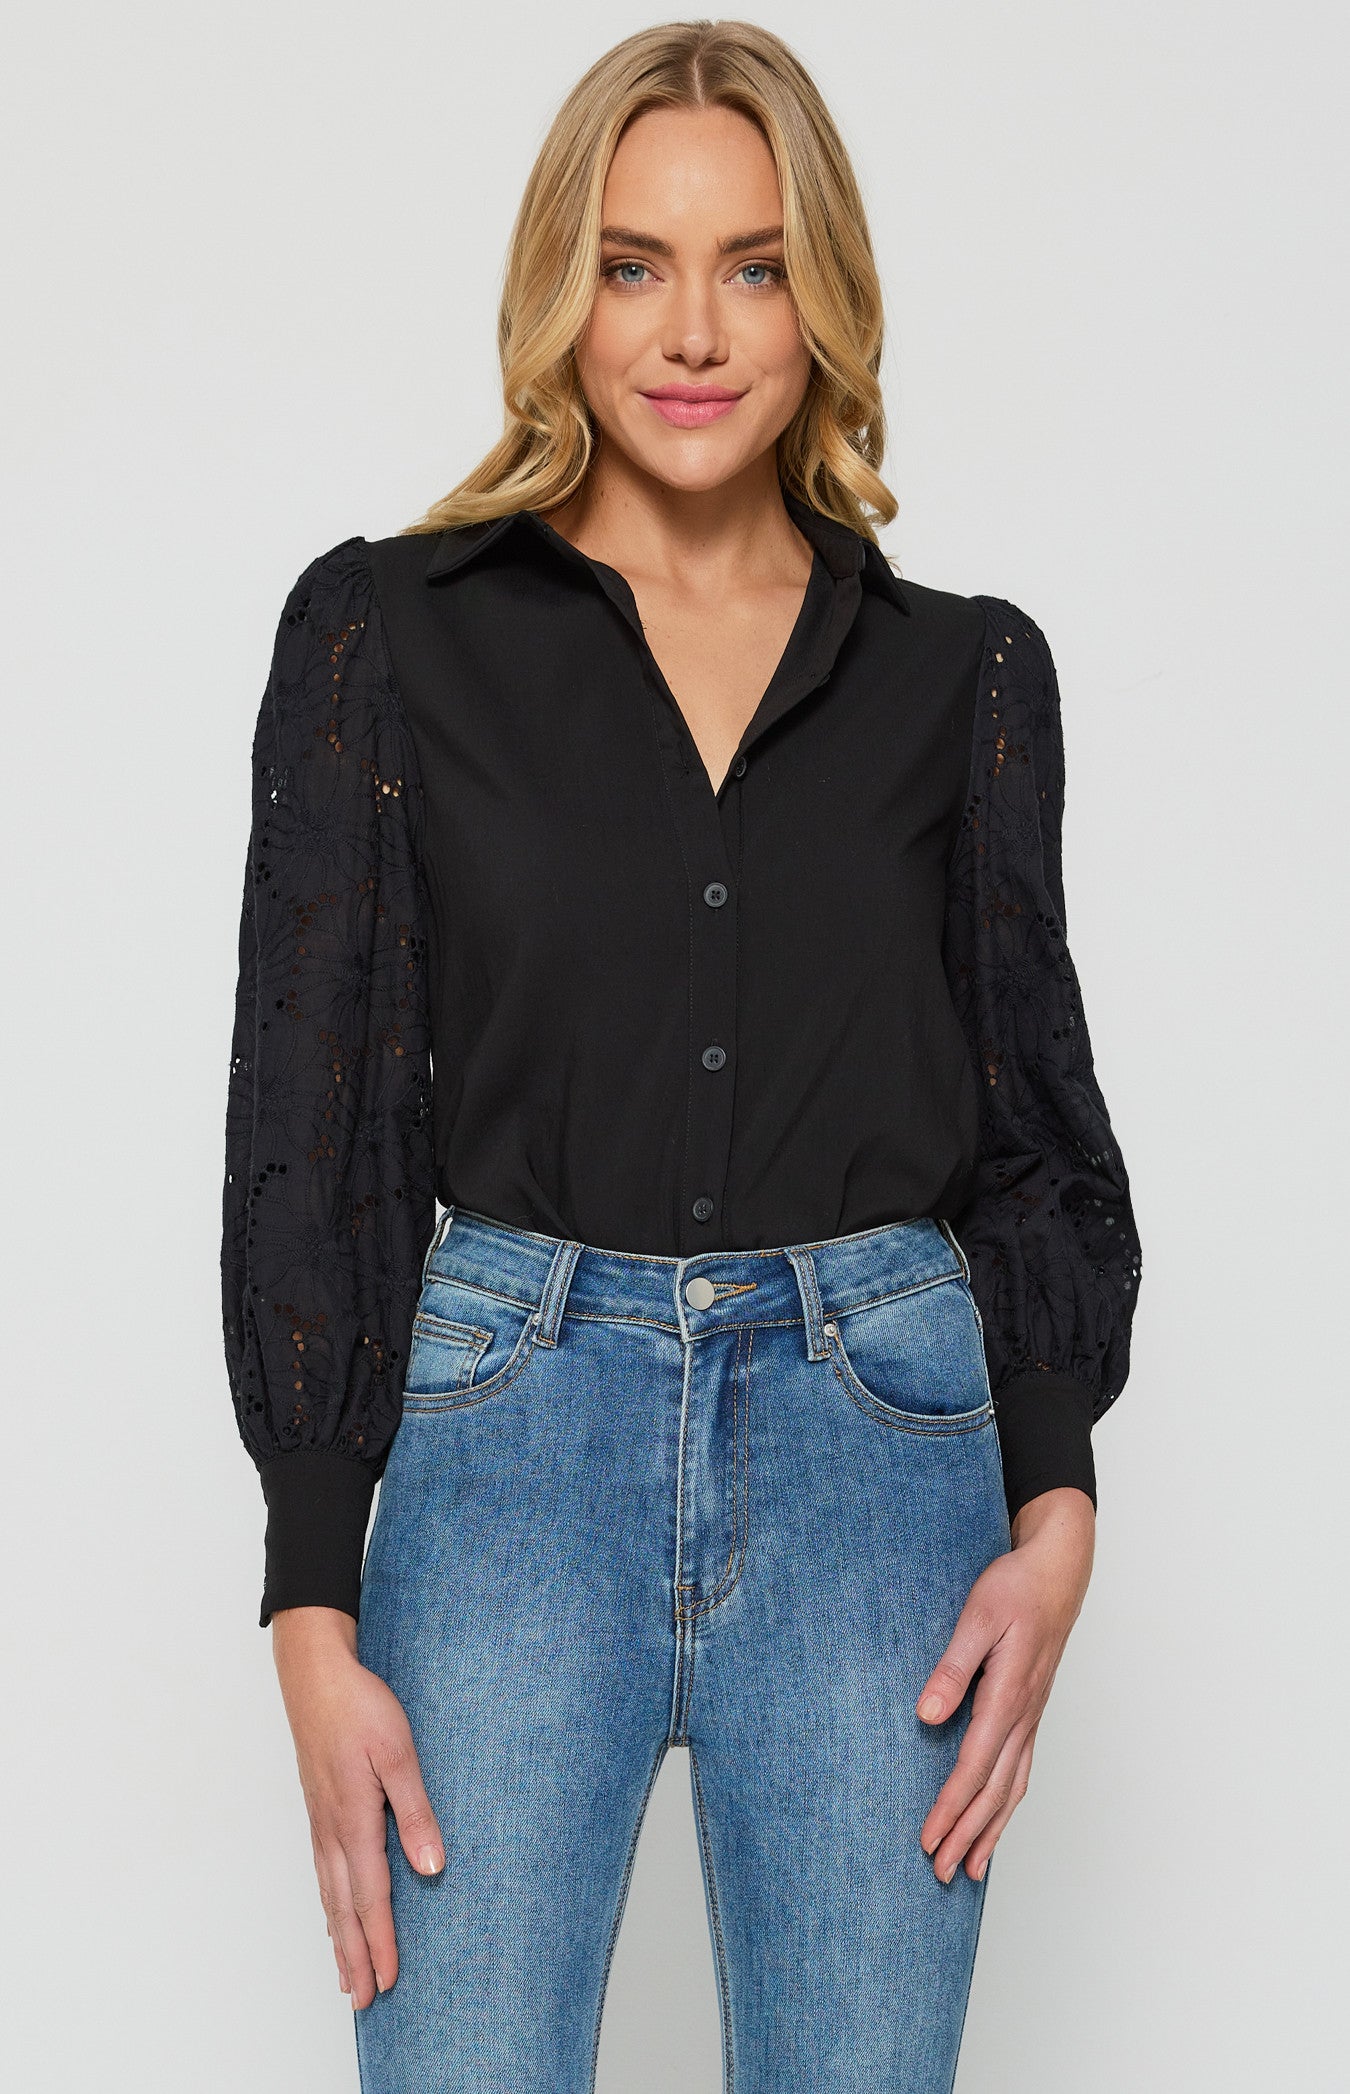 Contrast Cotton Embroidery Sleeves Button up Shirt